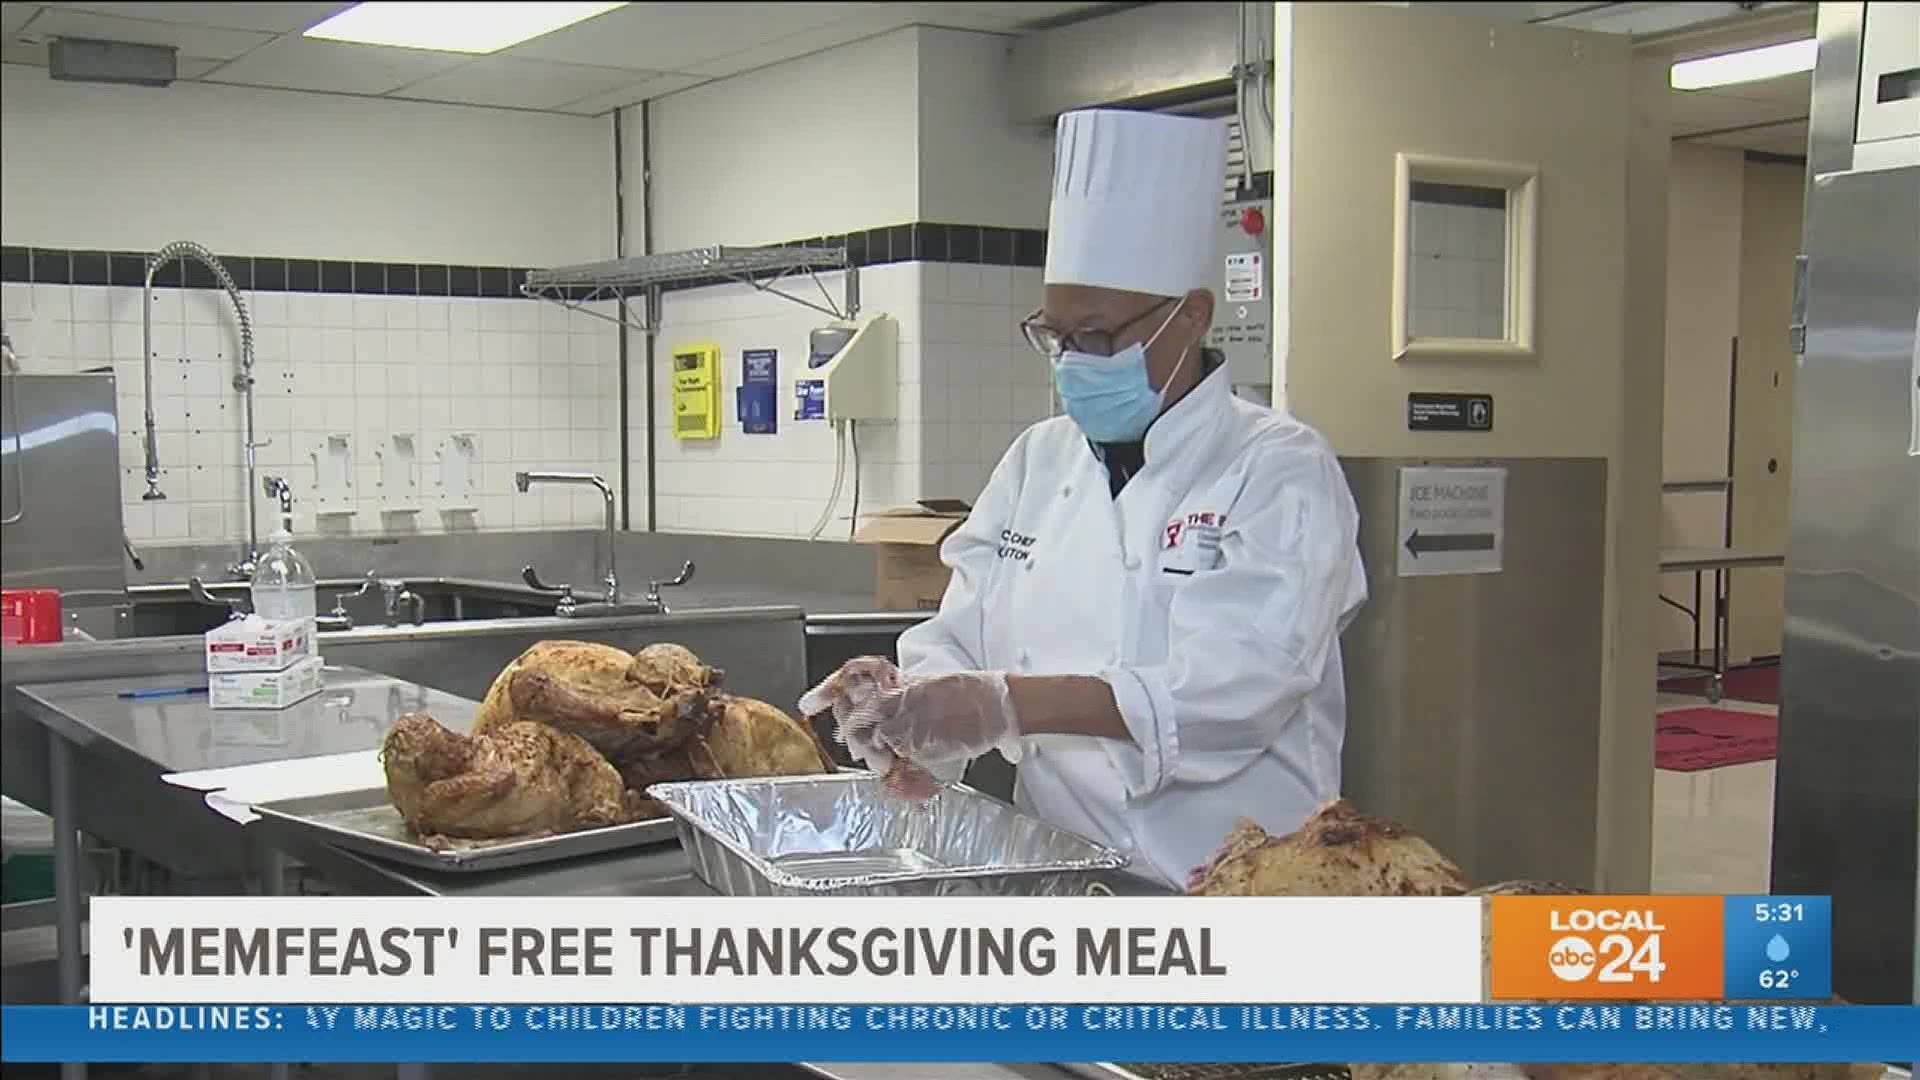 Despite the challenges of a pandemic, local organizers are ensuring no one goes hungry on Thanksgiving